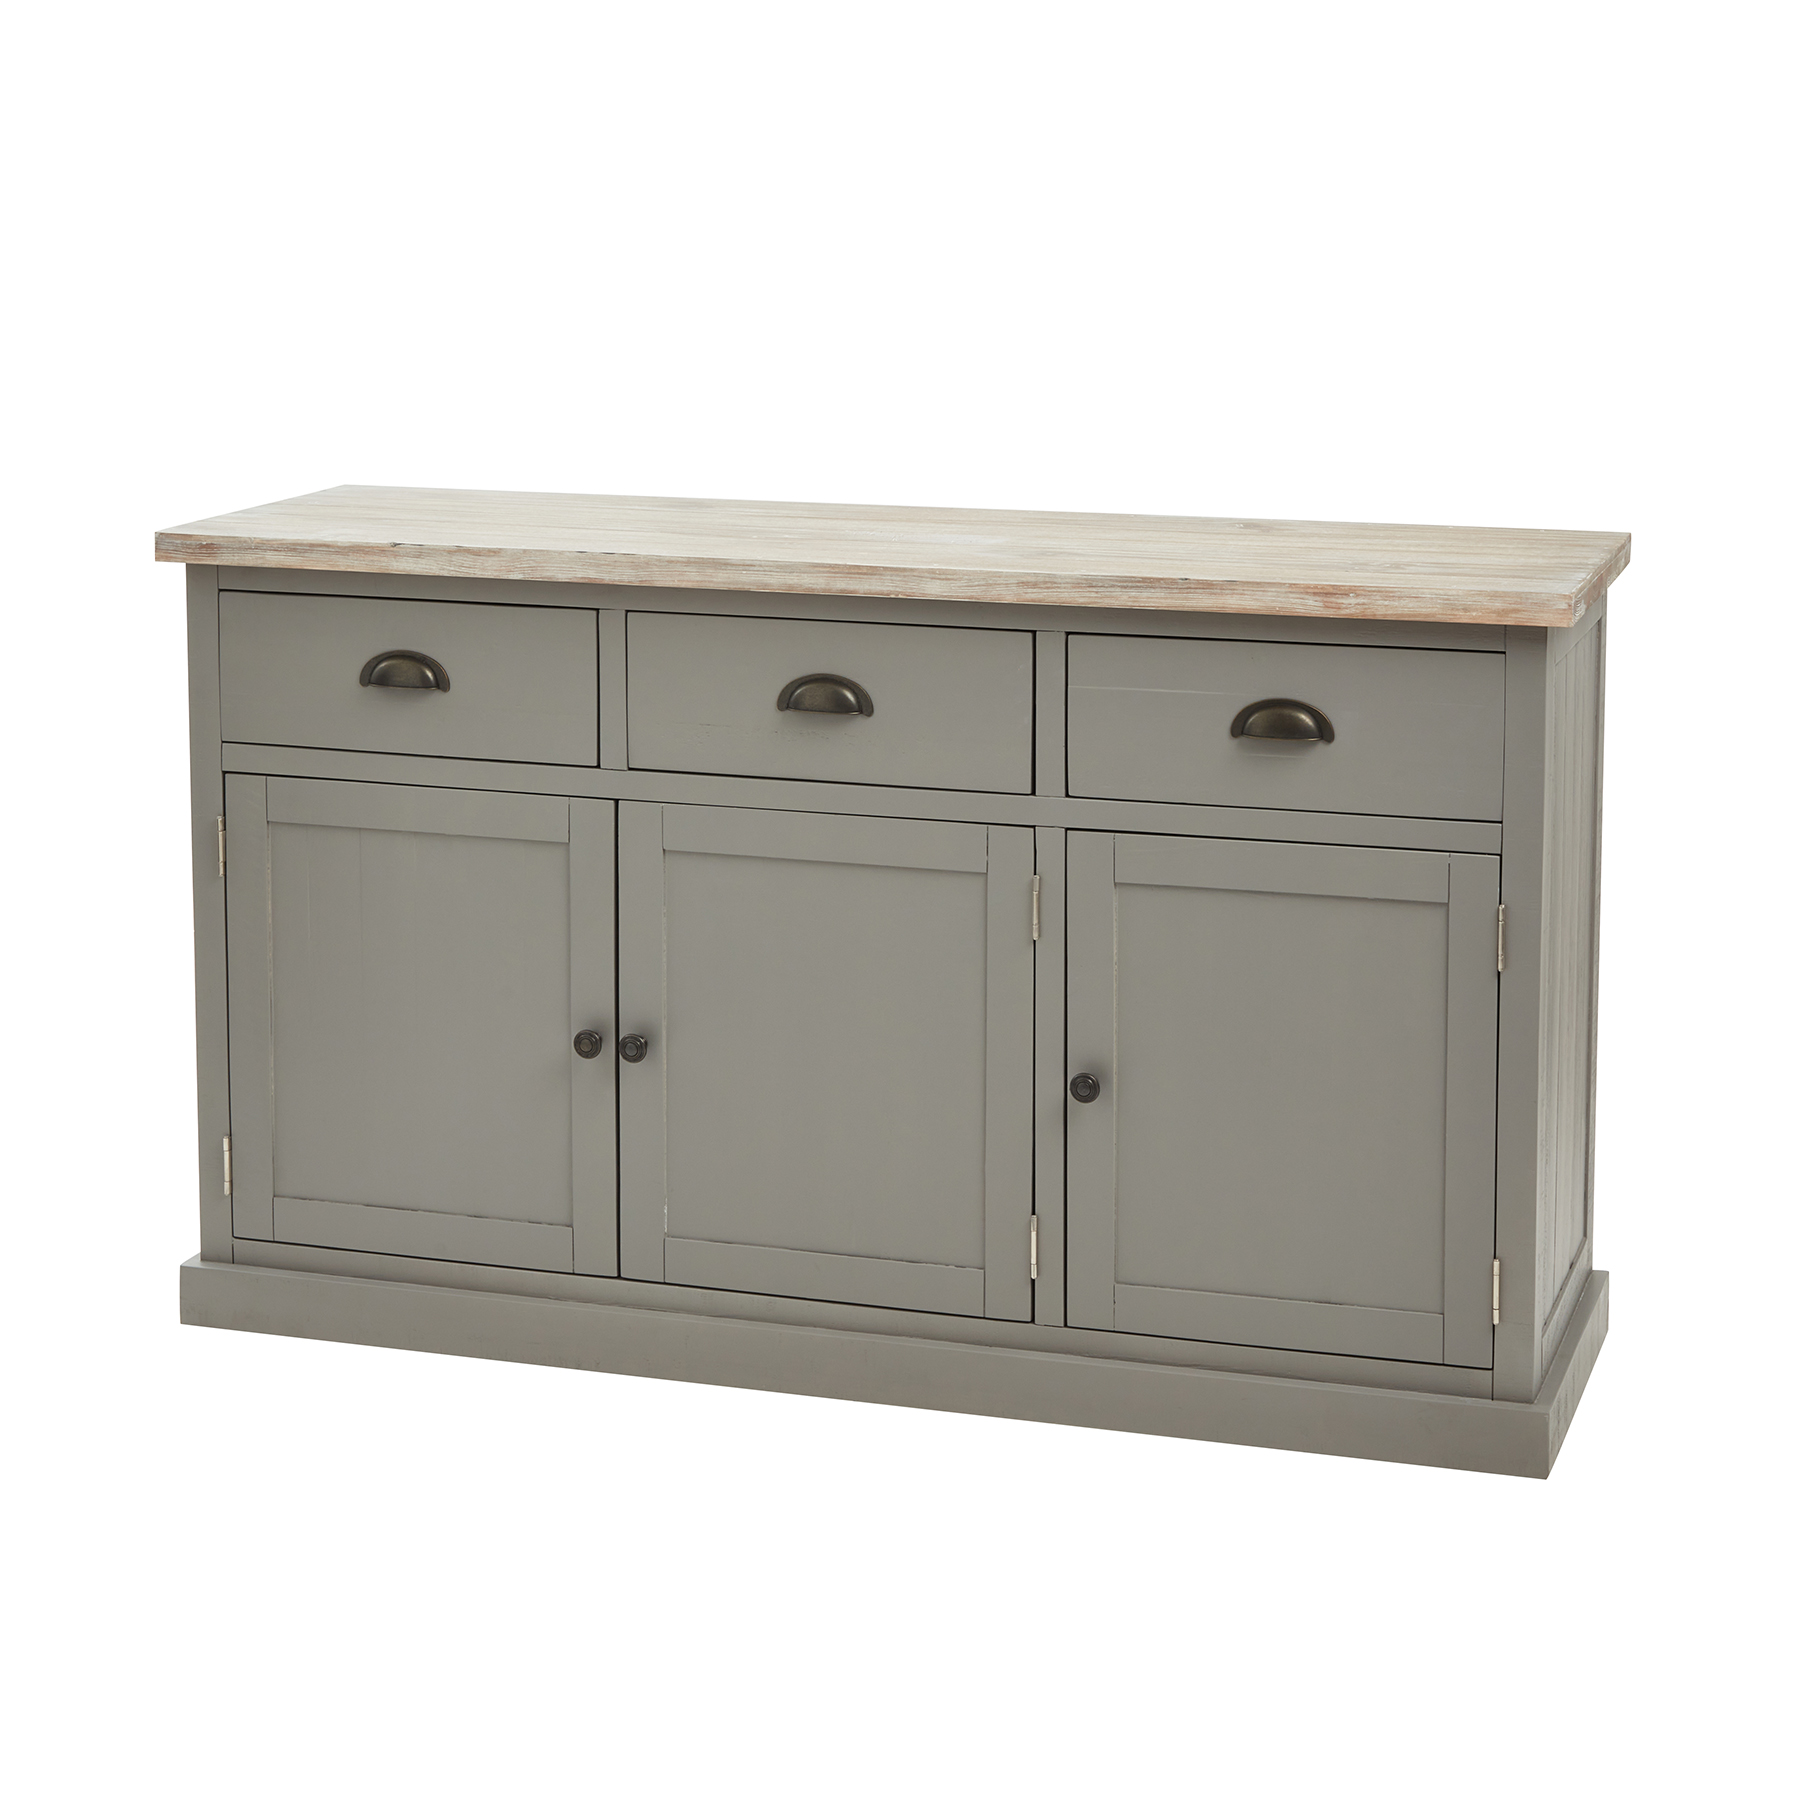 The Oxley Collection Sideboard - Image 1